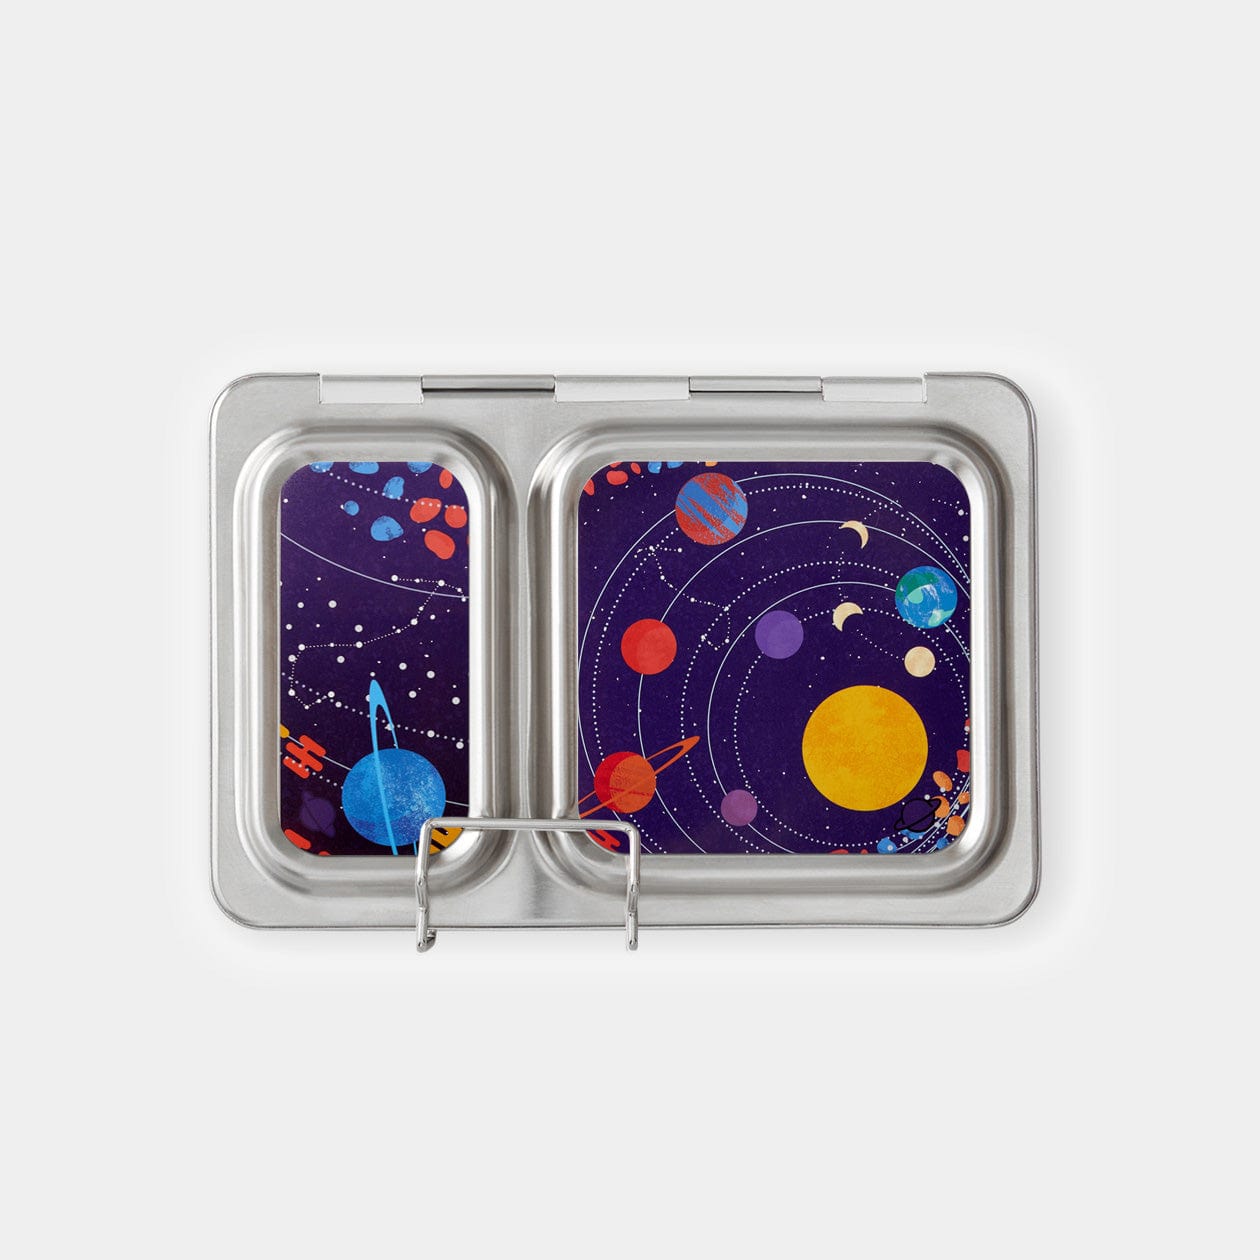 Launch Planetbox Lunchbox Magnets